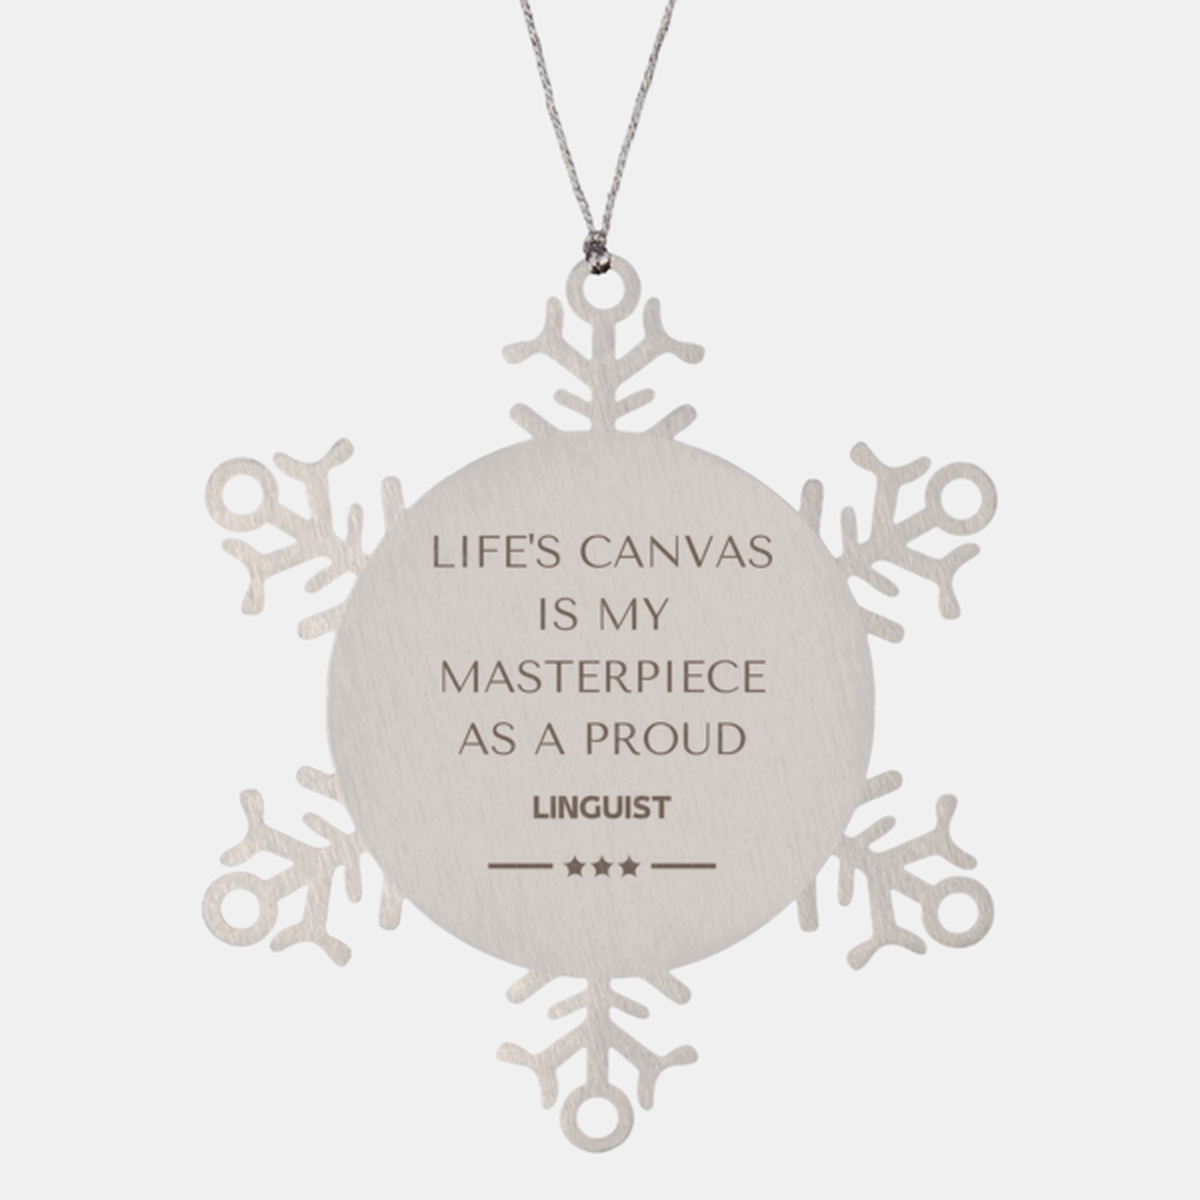 Proud Linguist Gifts, Life's canvas is my masterpiece, Epic Birthday Christmas Unique Snowflake Ornament For Linguist, Coworkers, Men, Women, Friends